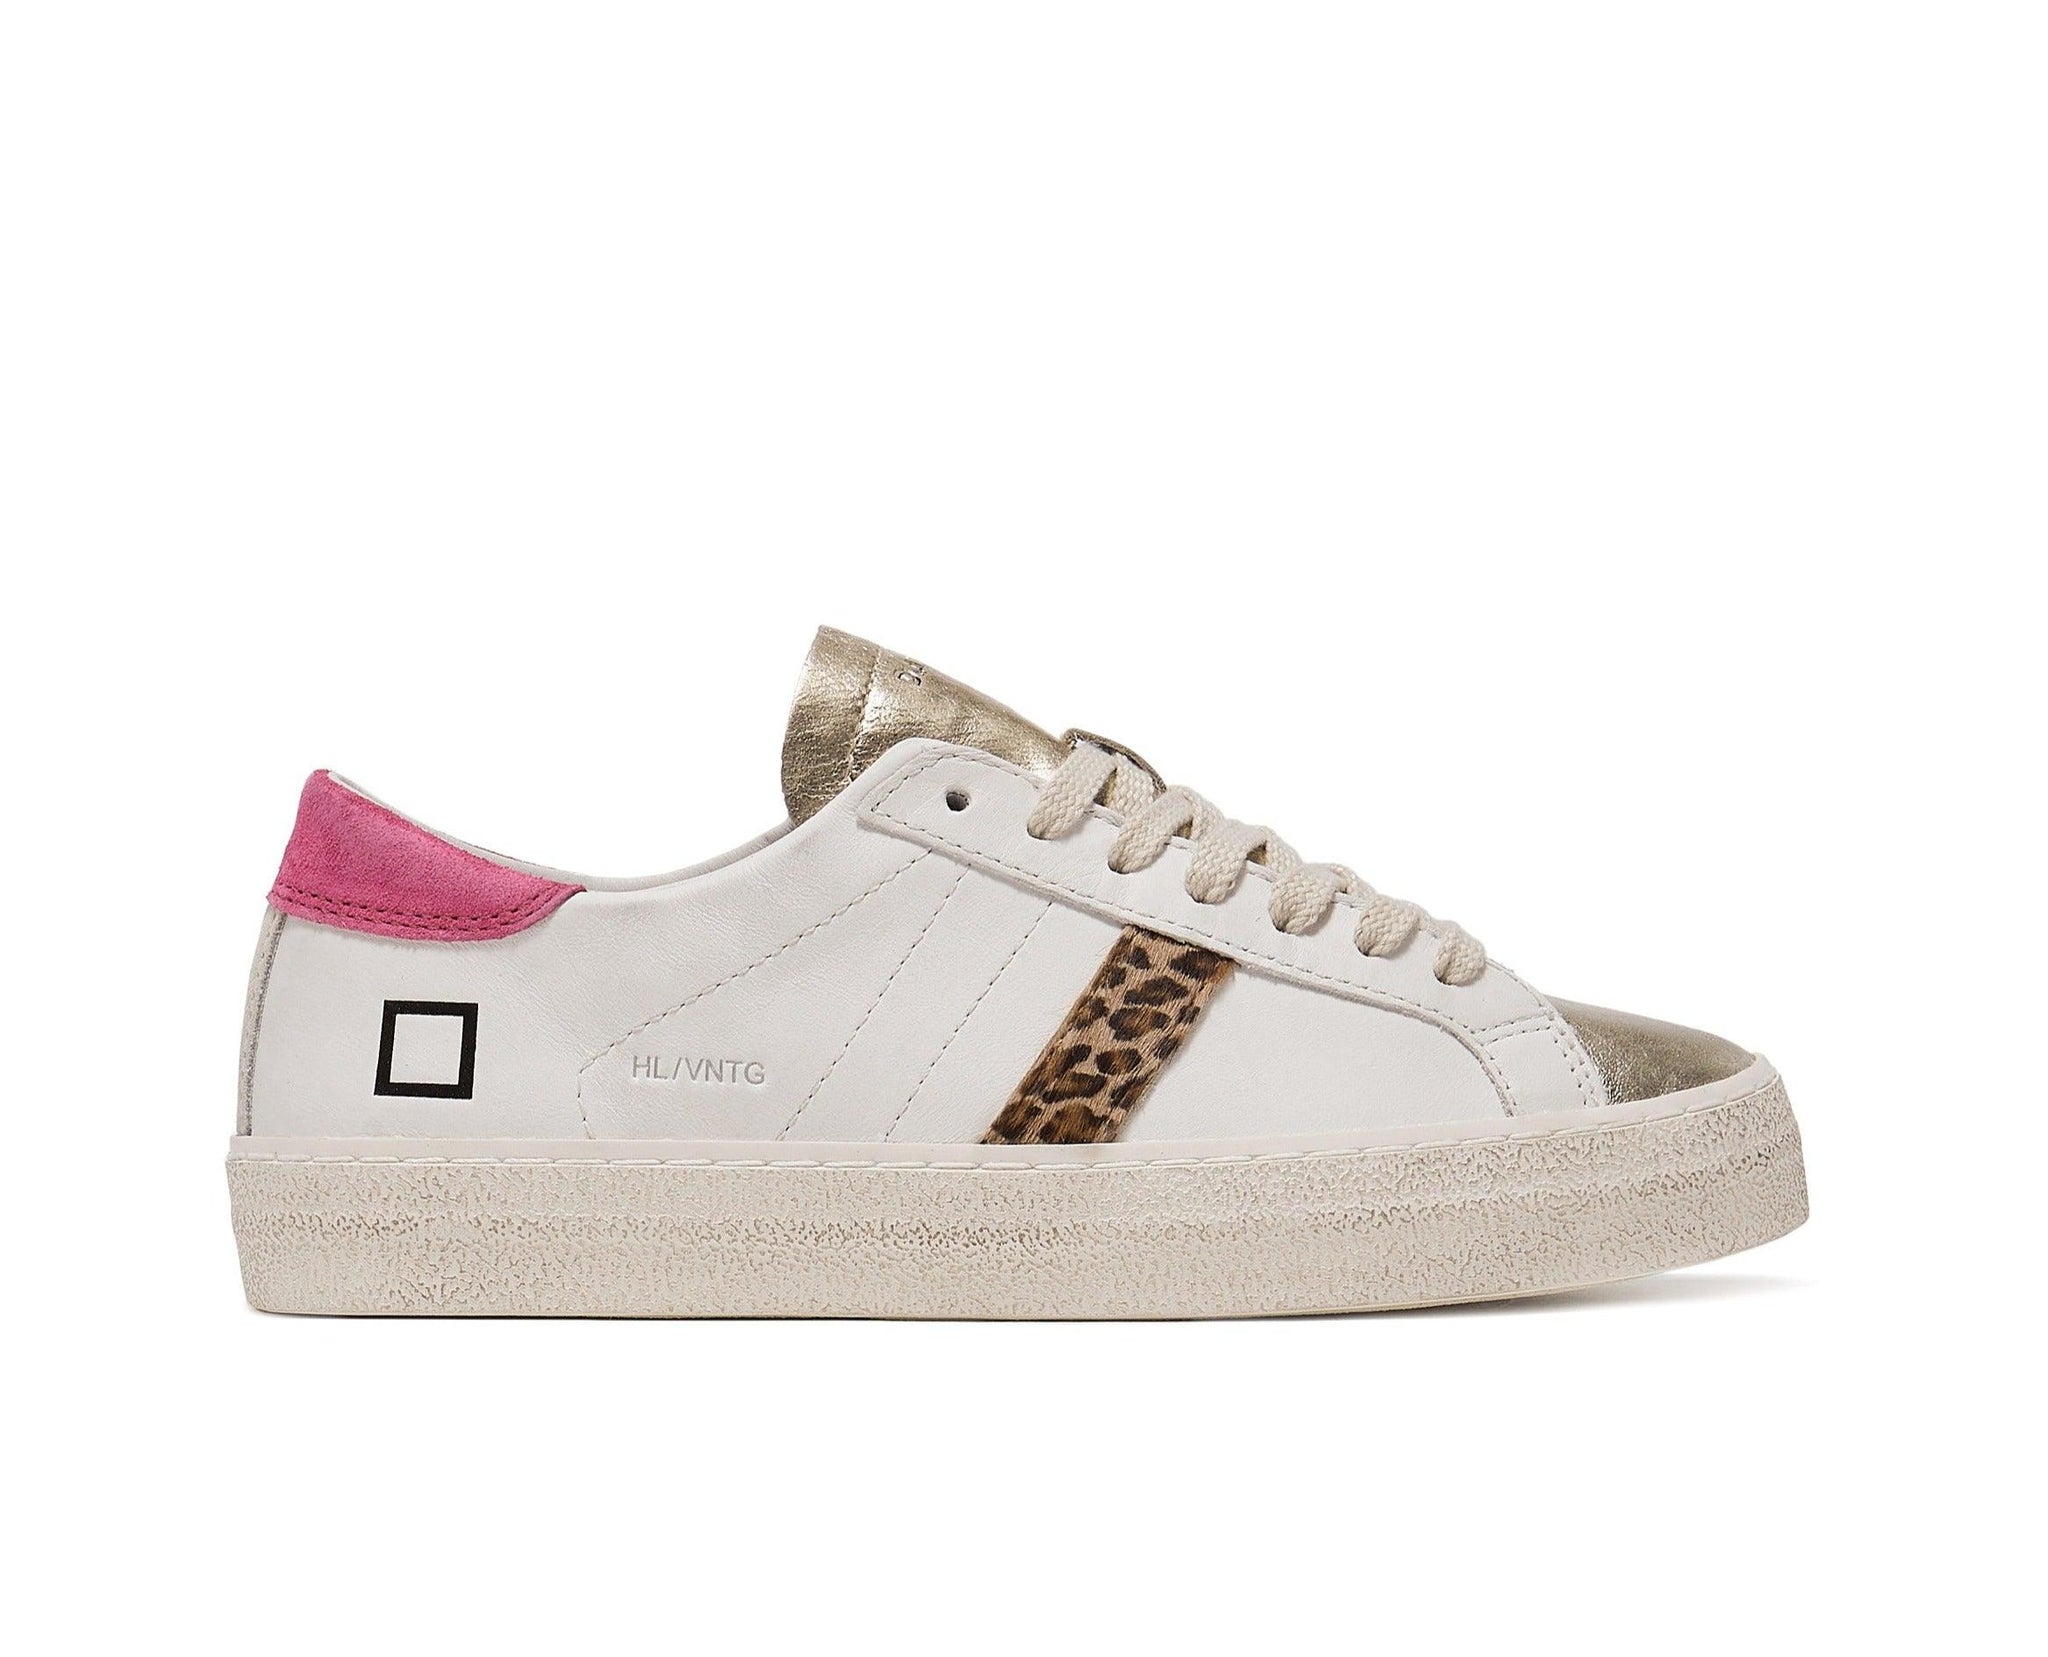 D.A.T.E Hill Low White and Pink trainer - MADE THE EDIT